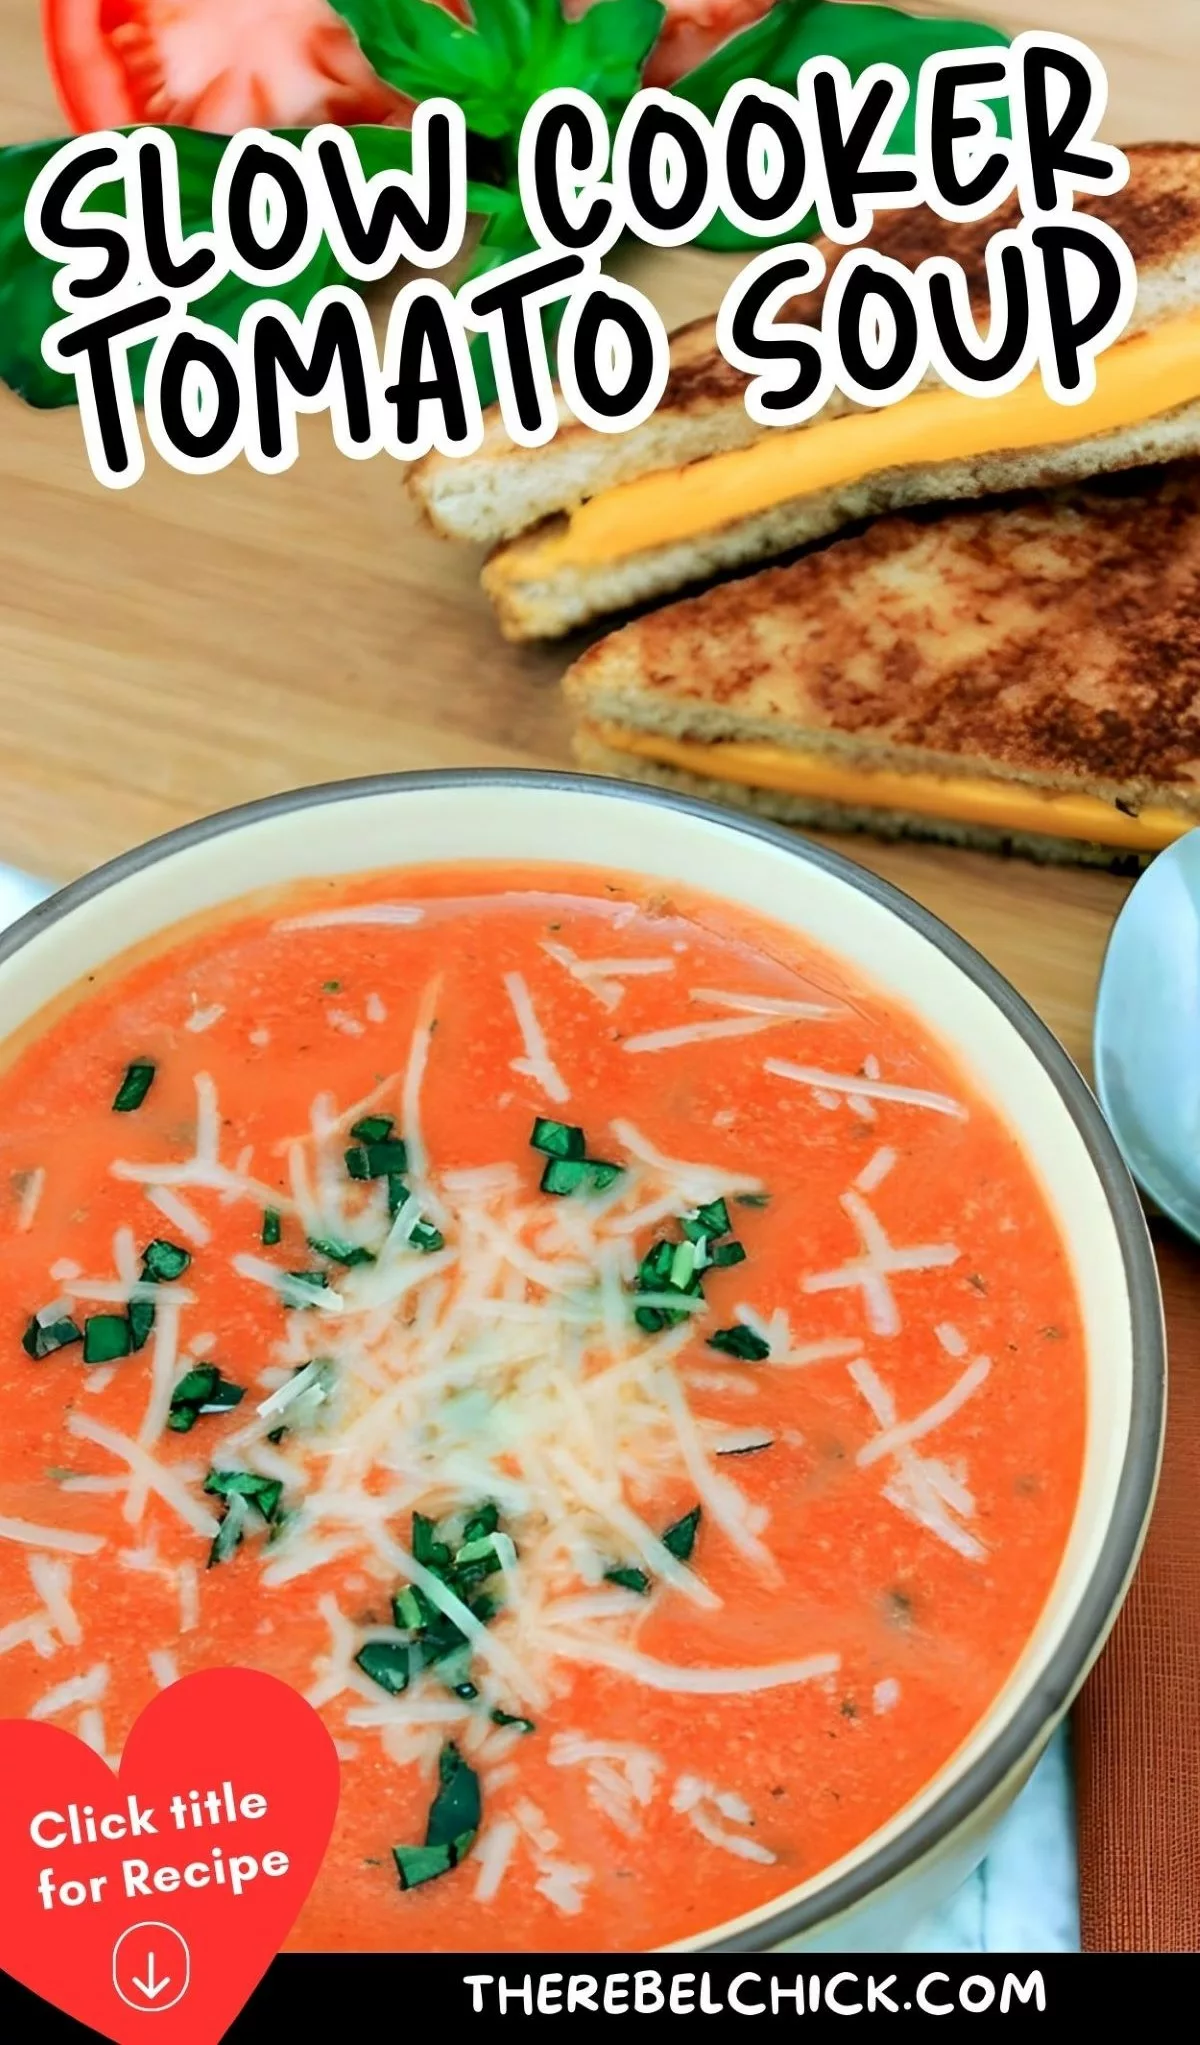 Slow Cooker Tomato Soup with Fresh Tomatoes